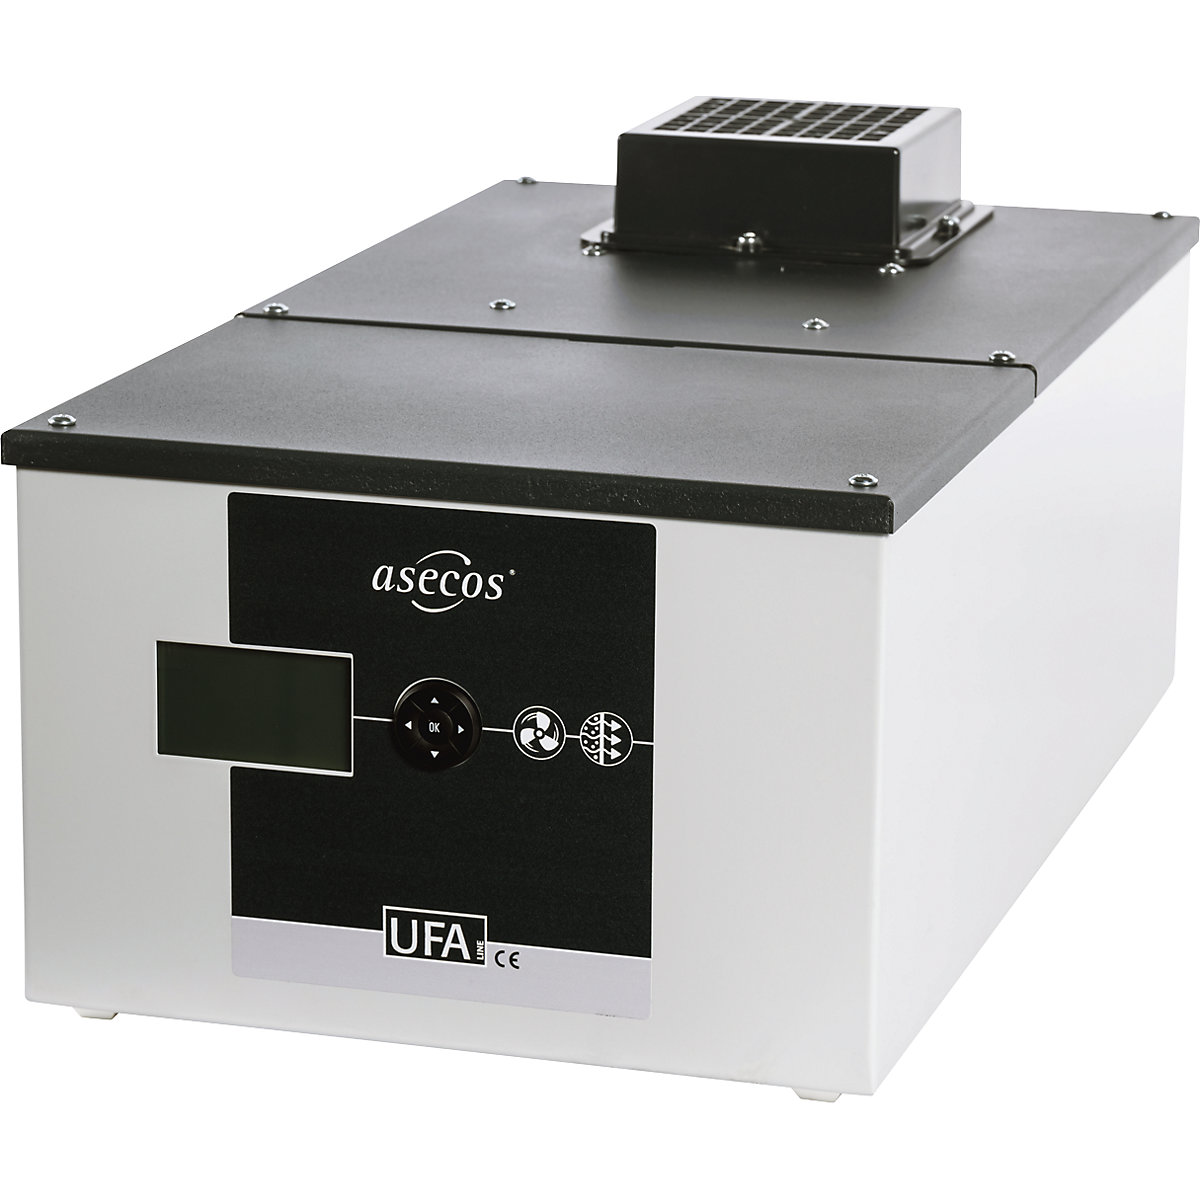 Air filtration module - asecos